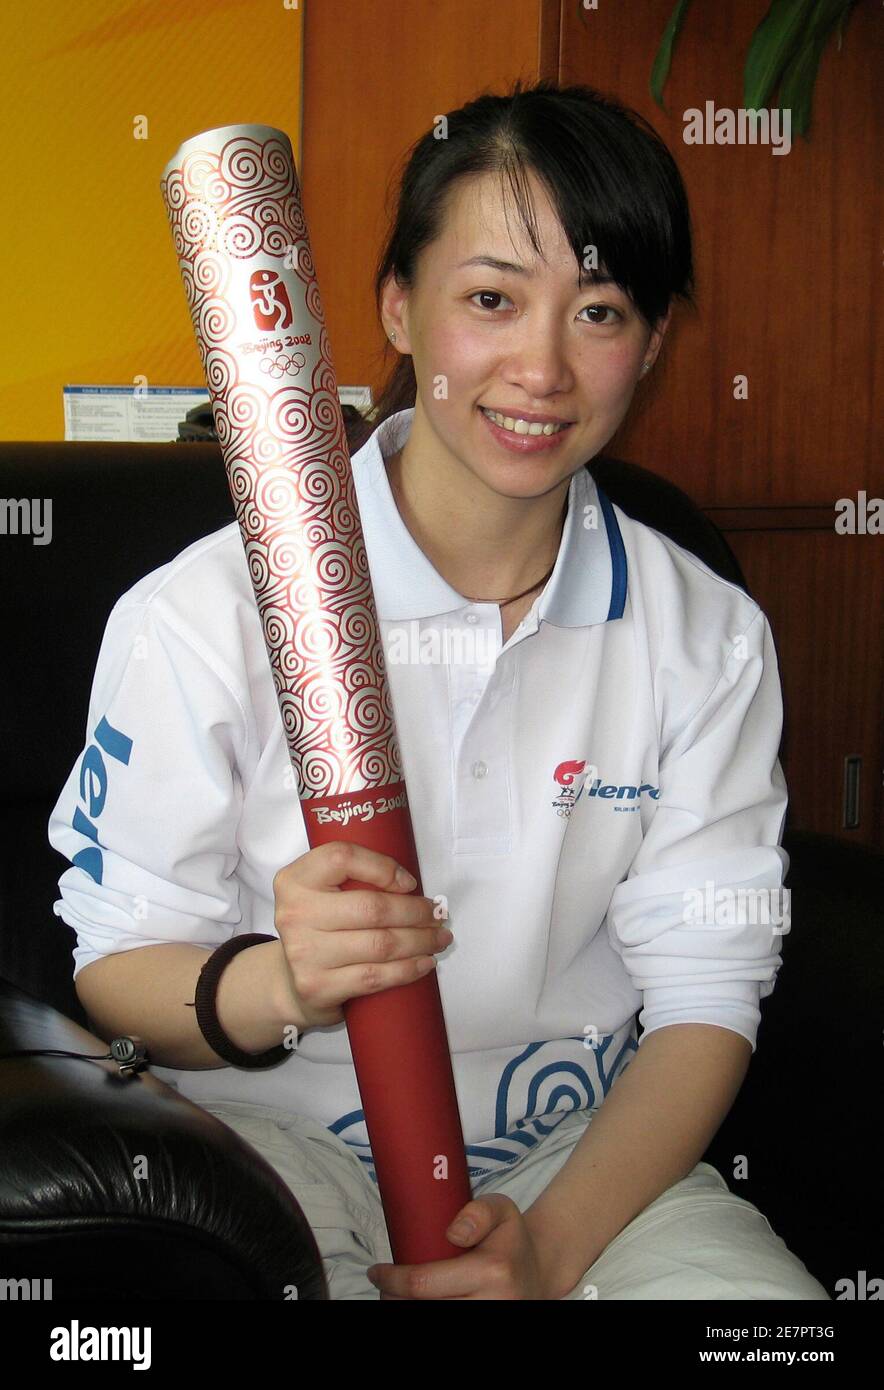 Jin Jing, a 27 year-old amputee and Paralympic fencer, displays a torch for Beijing Olympic Games during an interview with Reuters in Beijing April 11, 2008. The wheelchair-bound Chinese torch bearer has rocketed to national fame after fending off Tibet protesters in Paris, with a torrent of Internet messages feting her as a patriotic symbol of revulsion at the relay mayhem.  REUTERS/Sally Huang (CHINA) Stock Photo